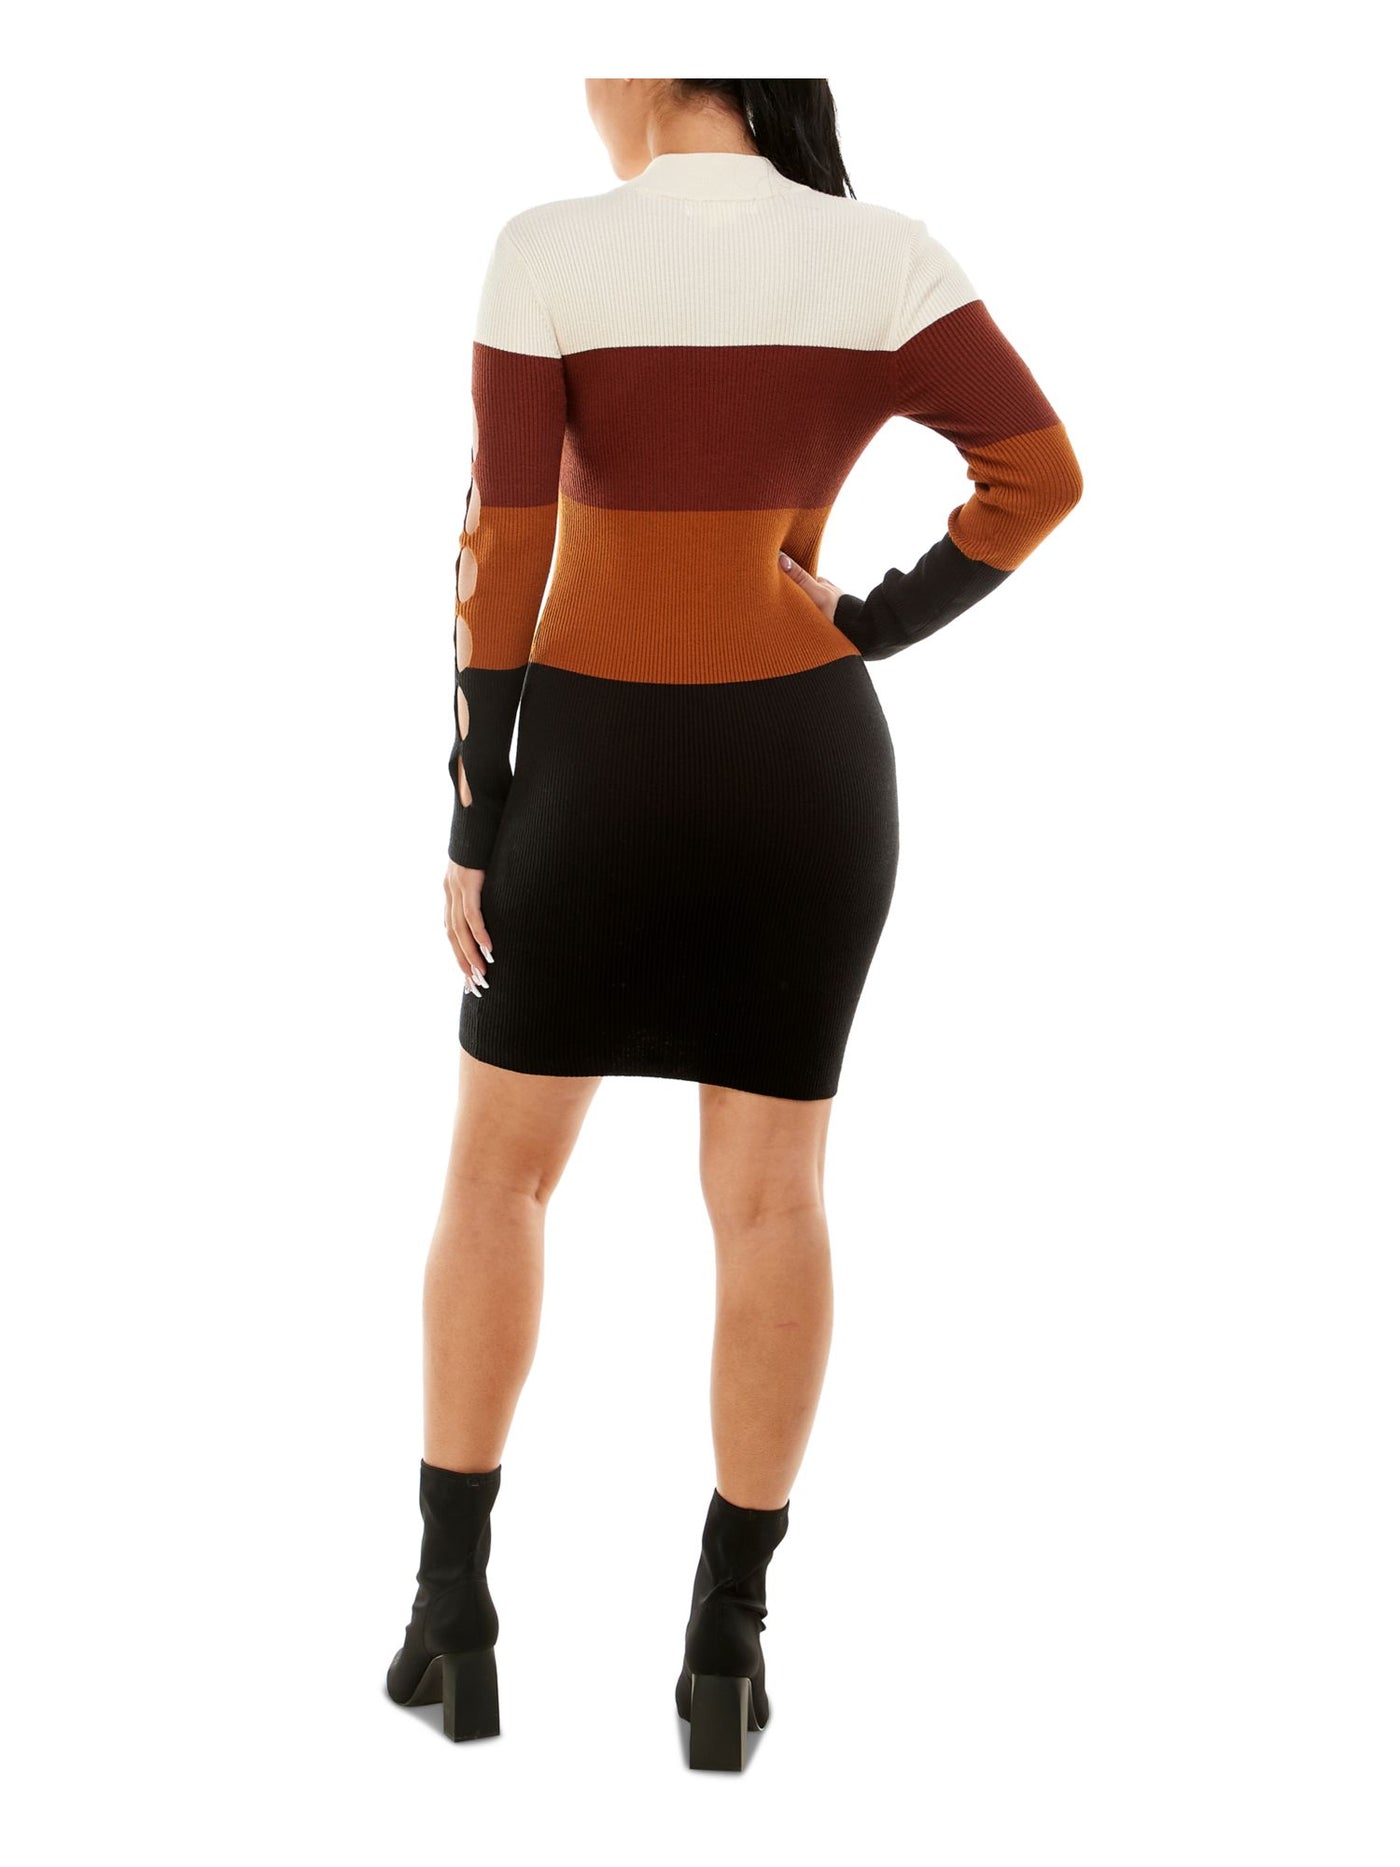 PLANET GOLD Womens Brown Striped Long Sleeve Mock Neck Above The Knee Sweater Dress Juniors XS